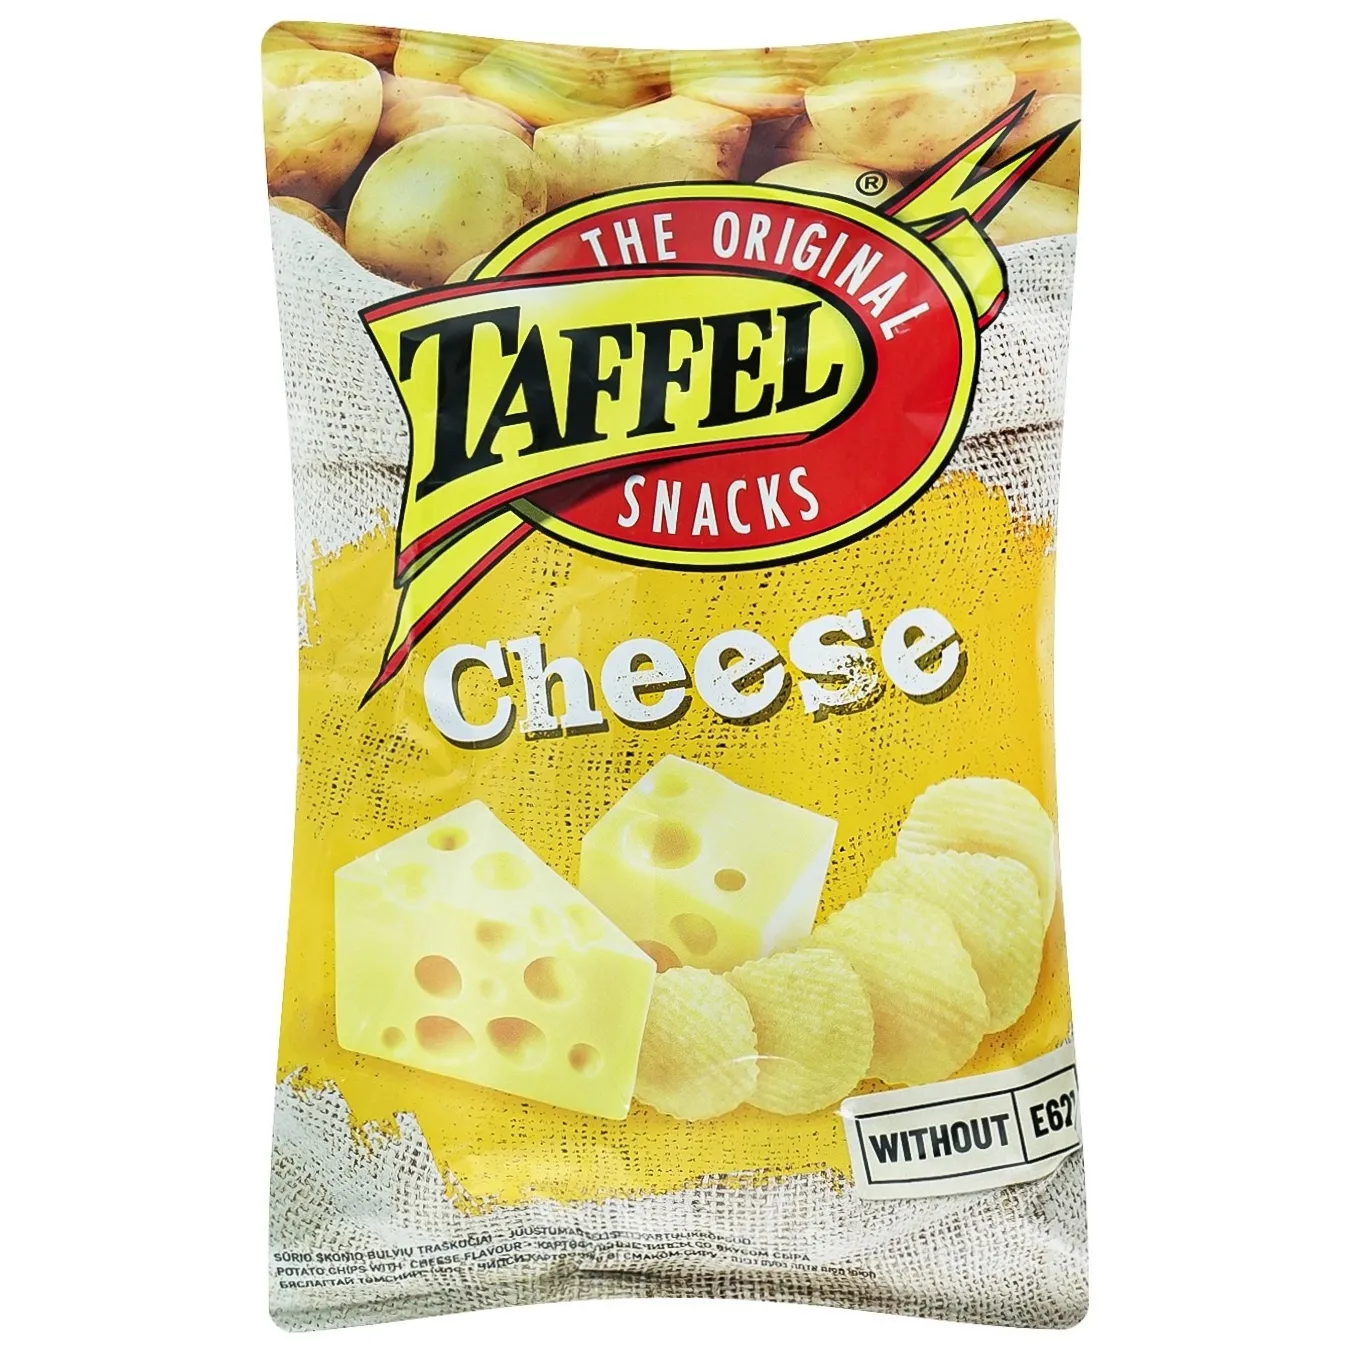 Taffel potato chips with cheese flavor 130g